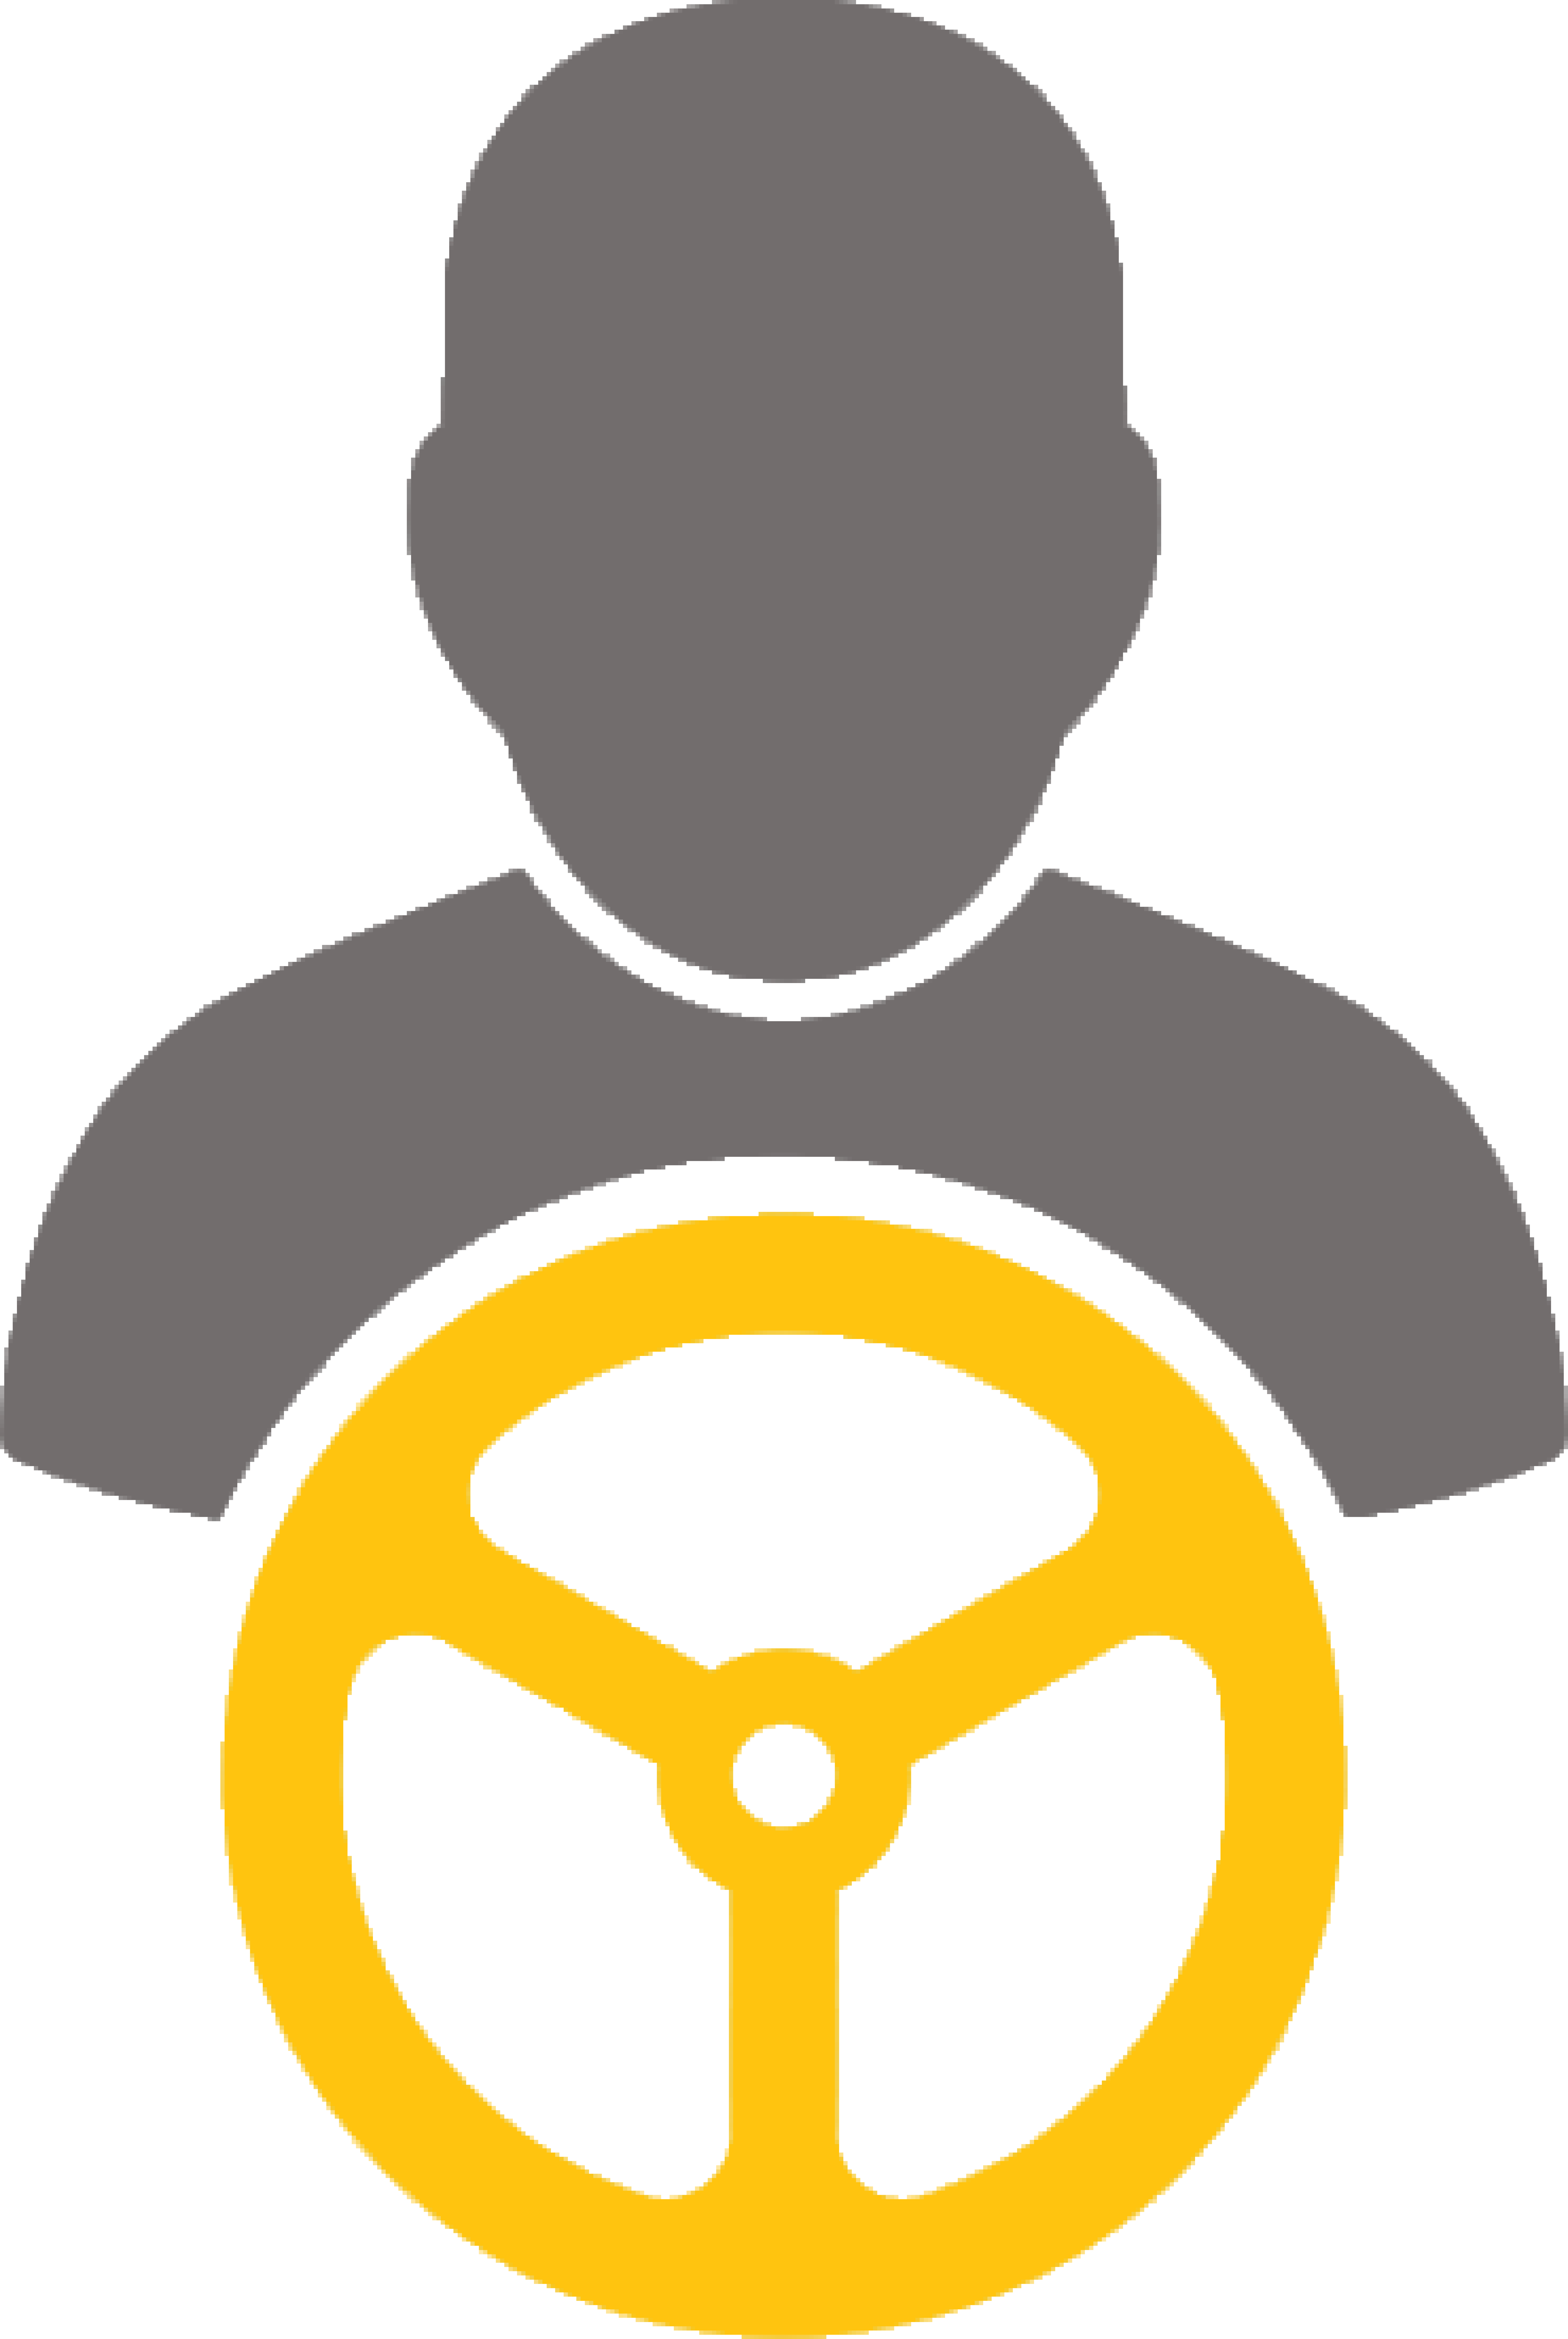 Icon of a person and a steering wheel